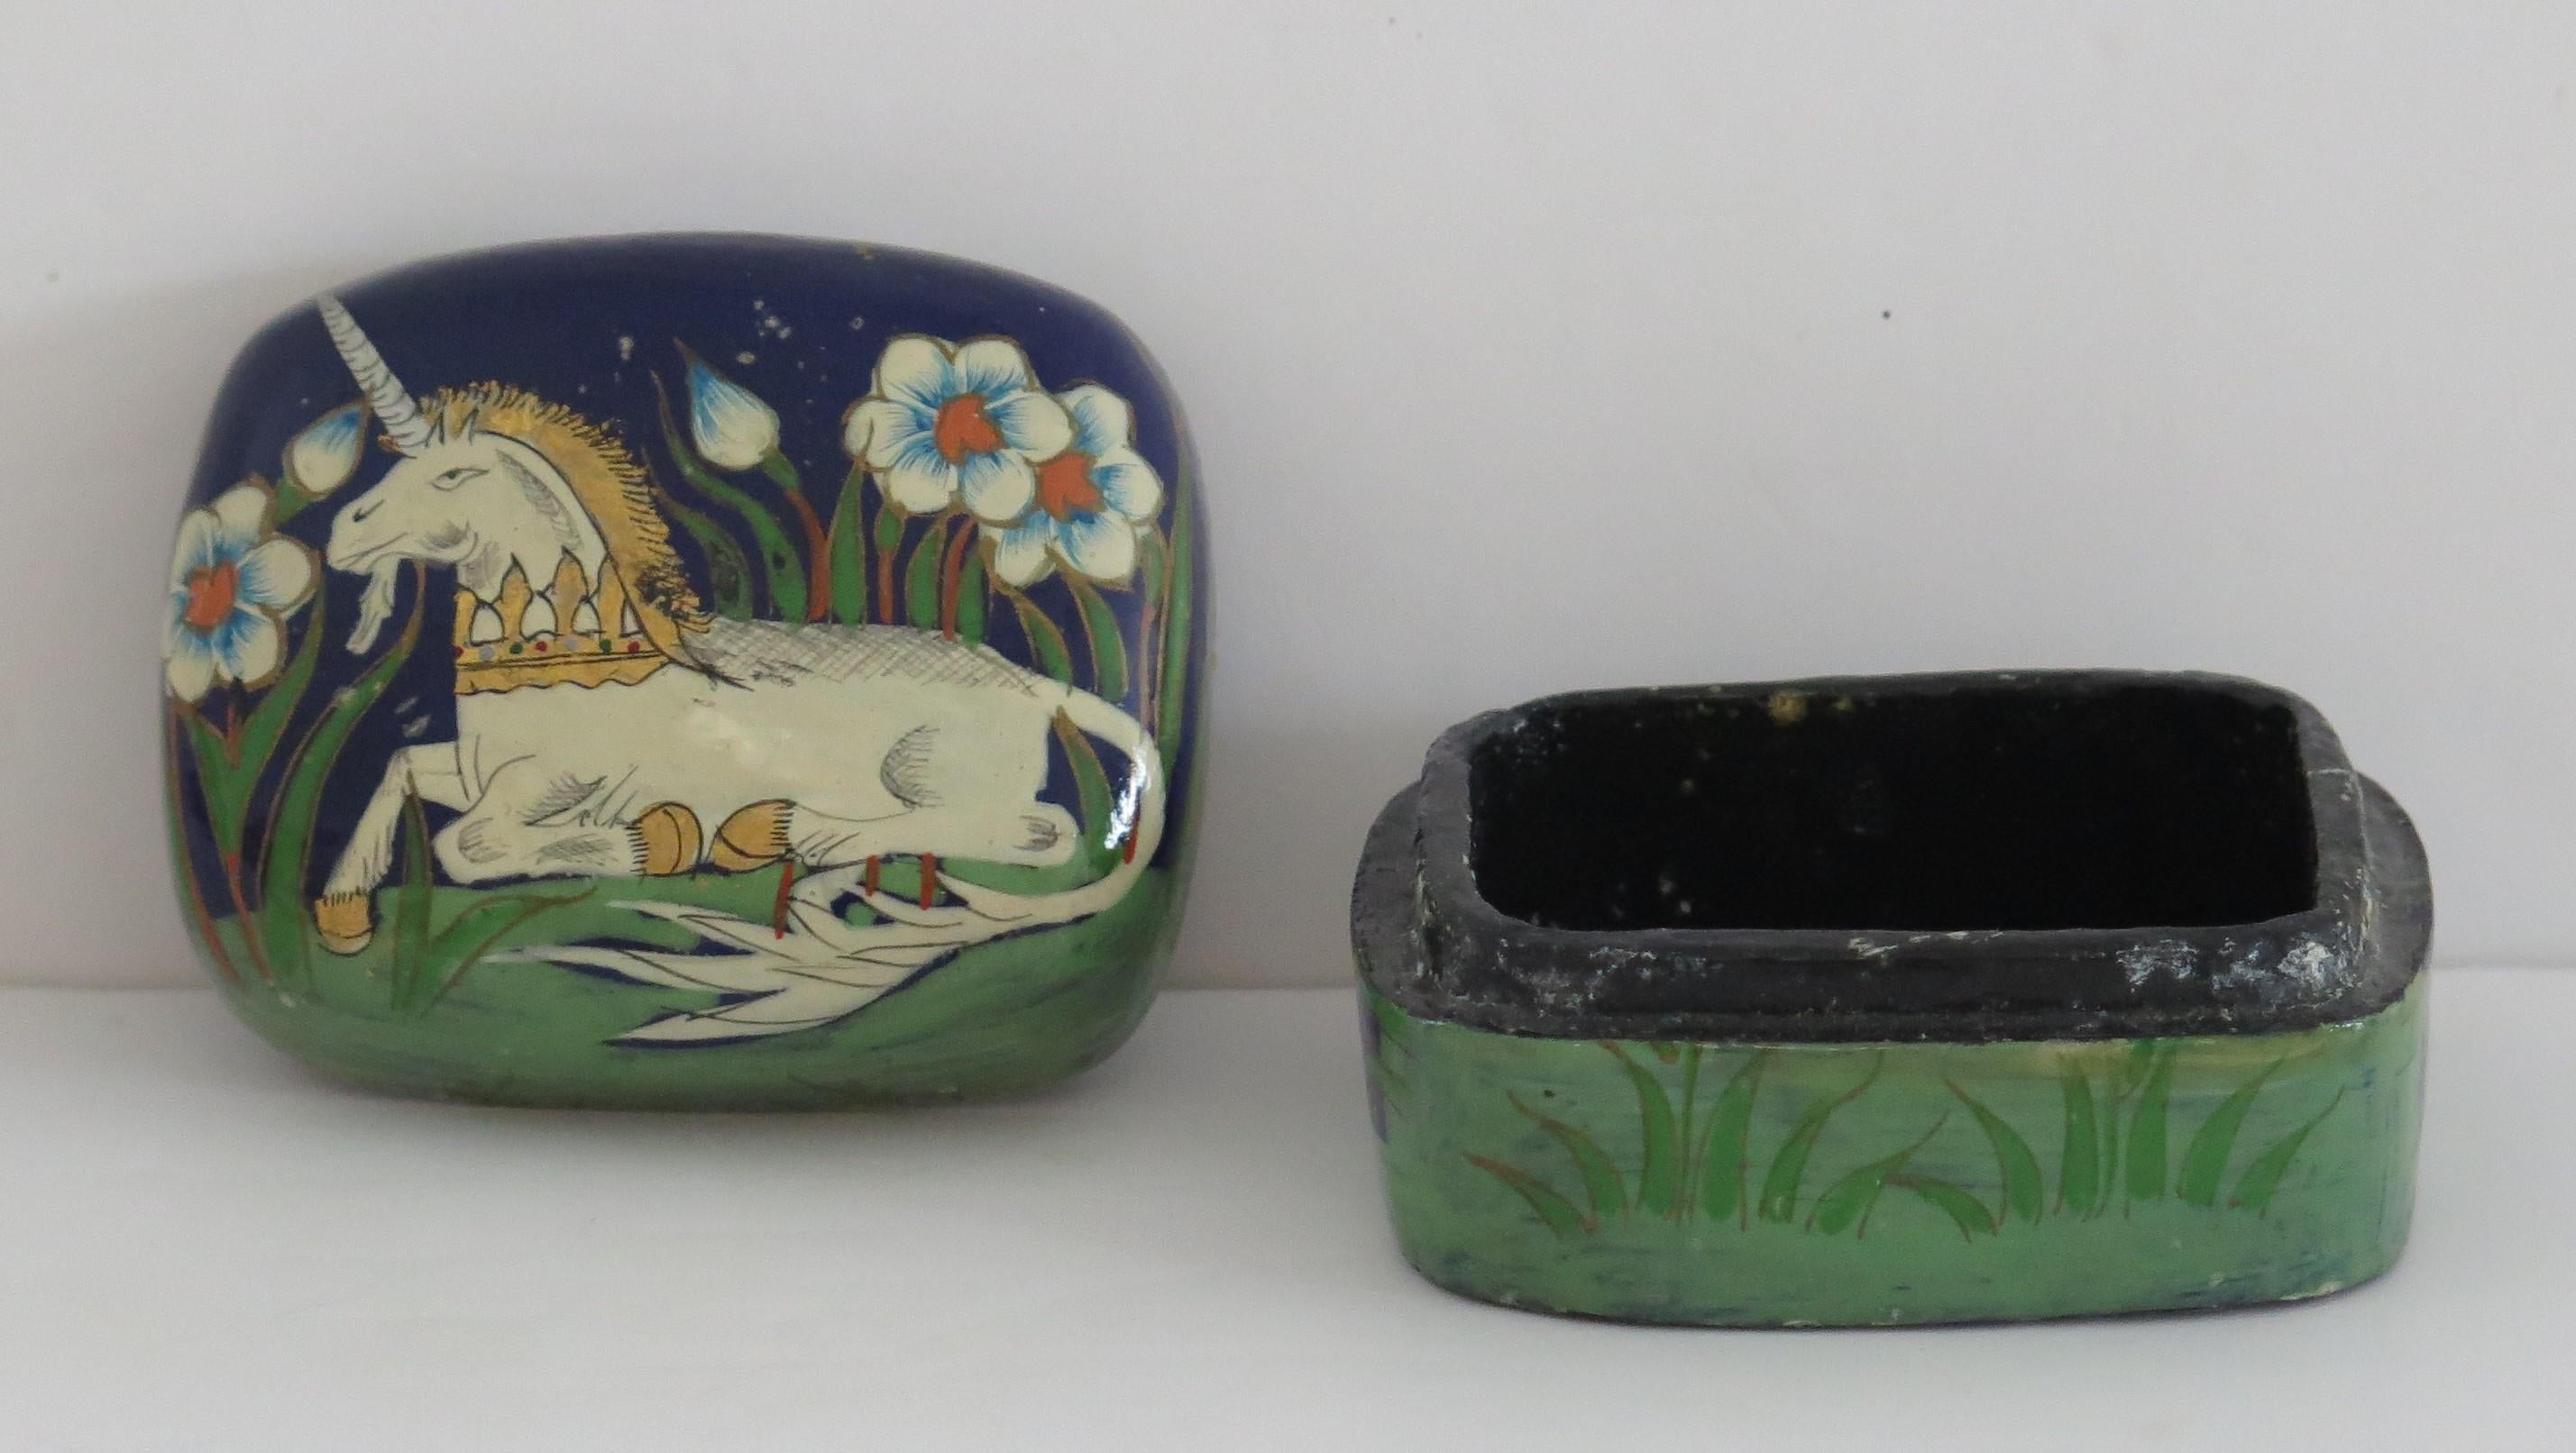 East Asian Asian Laquered Box with Lid Hand Painted Unicorn, Mid 20th Century